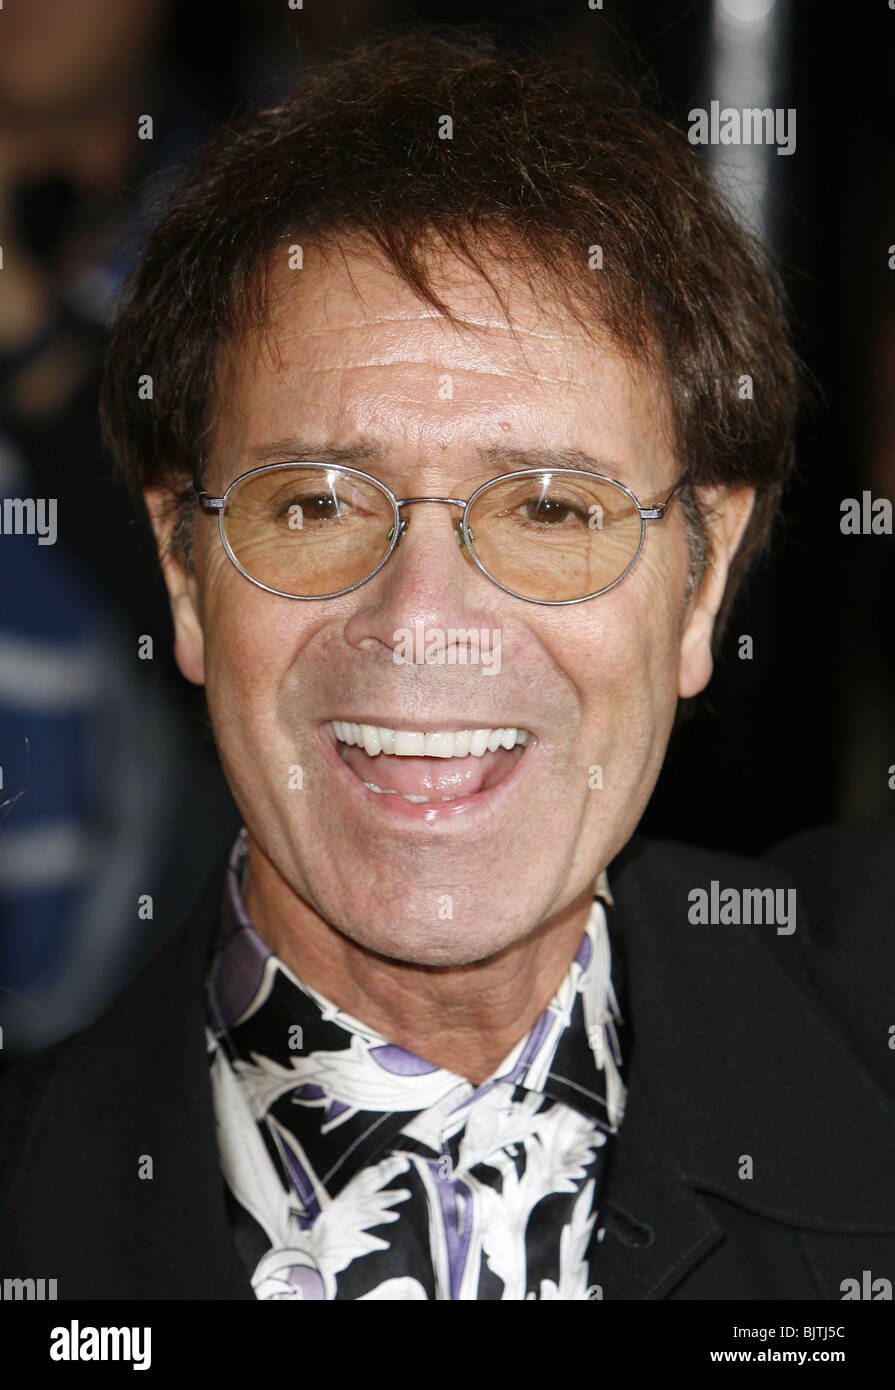 SIR CLIFF RICHARD UK PREMIERE OF NEW WEST END SHOW SPAMALOT PALACE THEATRE LONDON ENGLAND 17 October 2006 Stock Photo